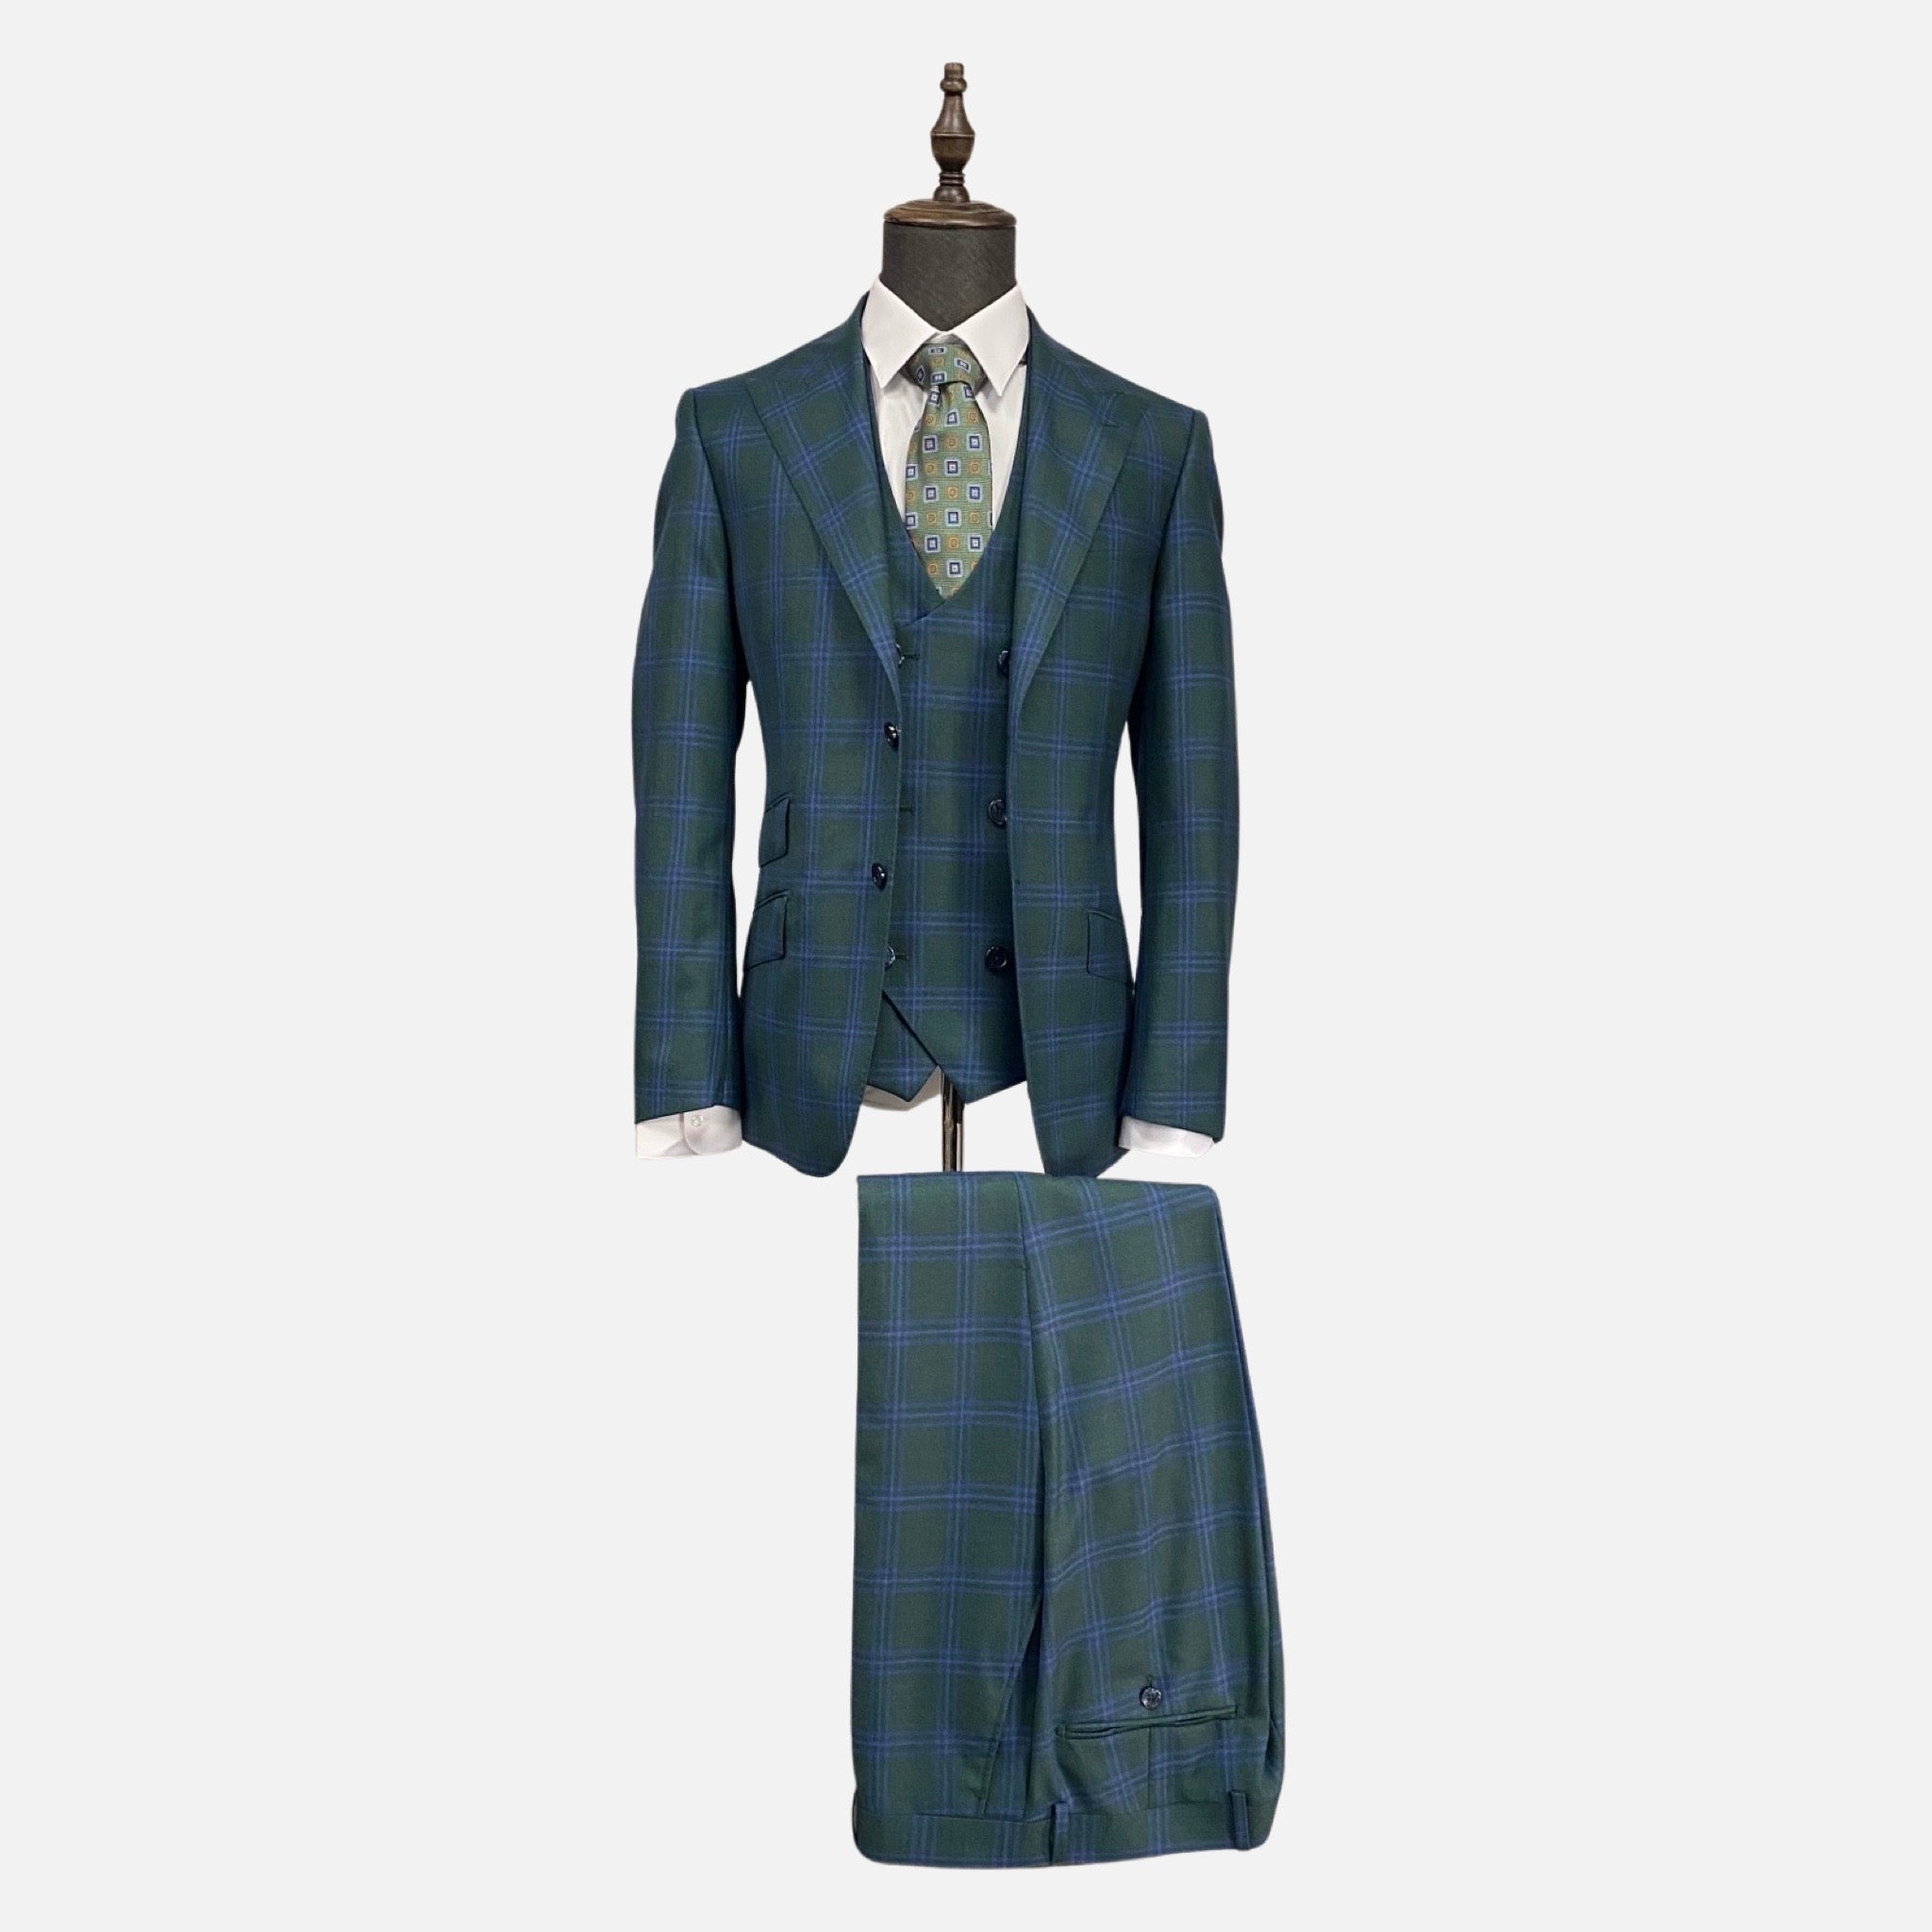 Tiglio Men's Green Plaid Italian Suit - Pure Wool, Classic Fit, 3-Piece with Vest, Peak Lapel, Single Breasted